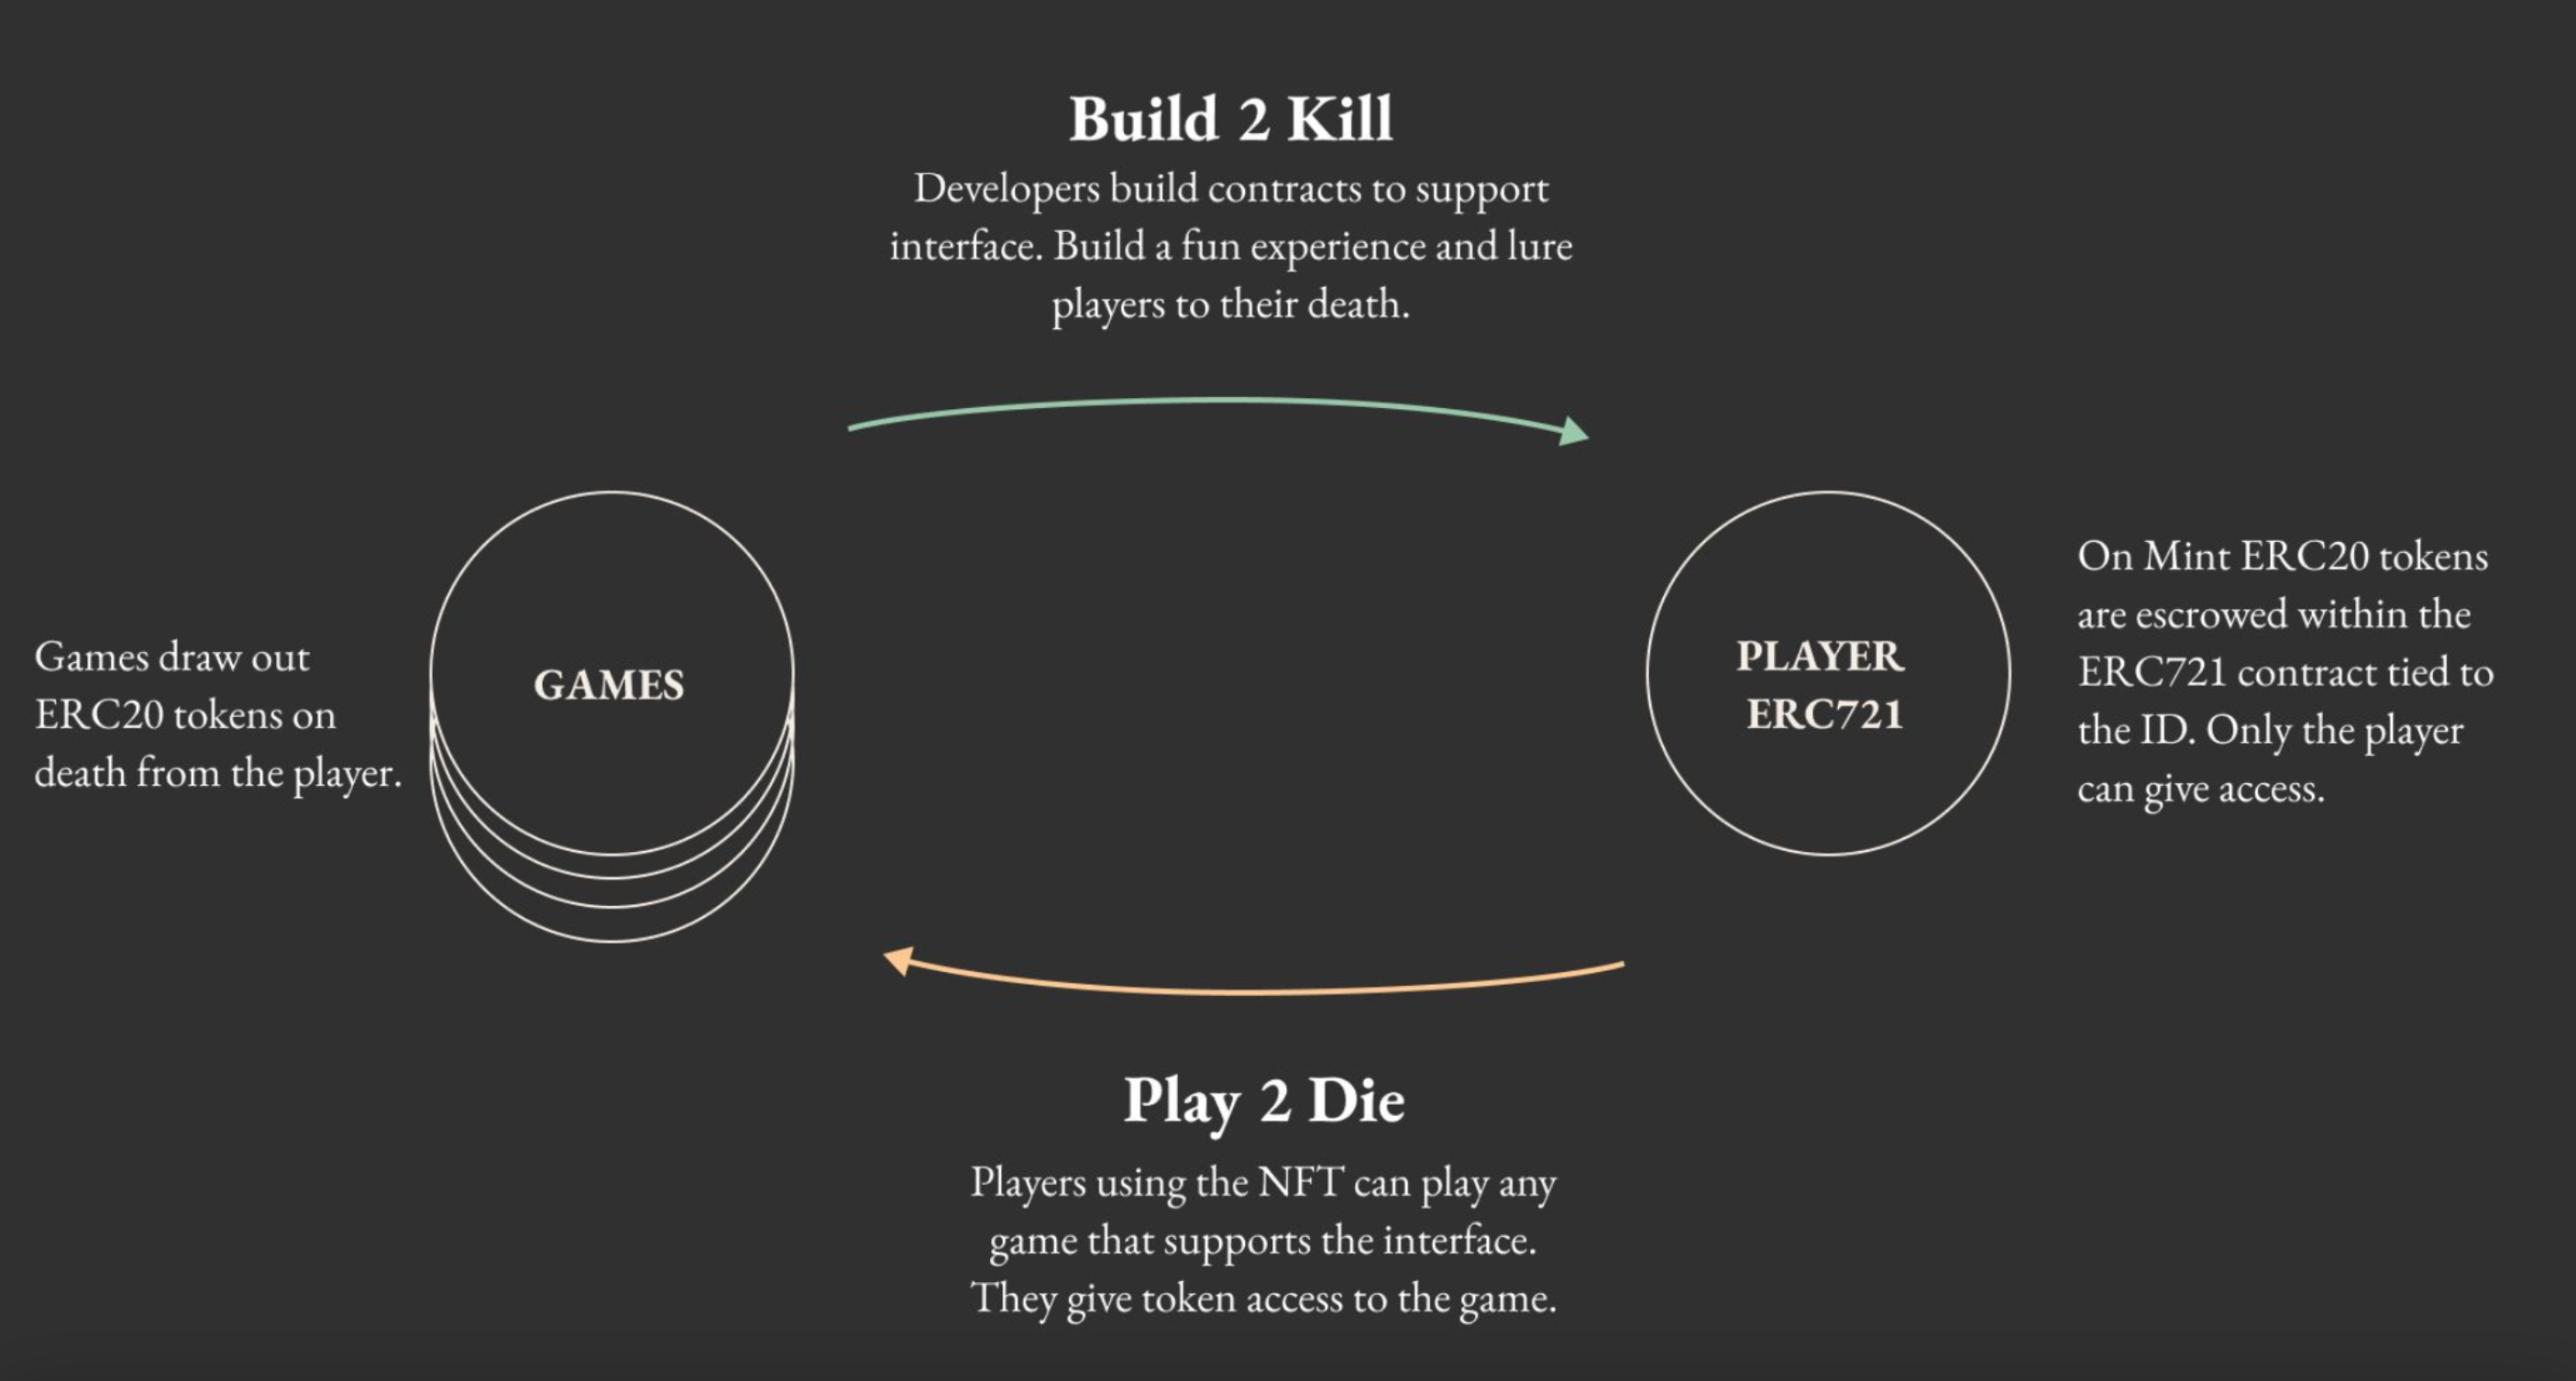 Early Play2Die concept